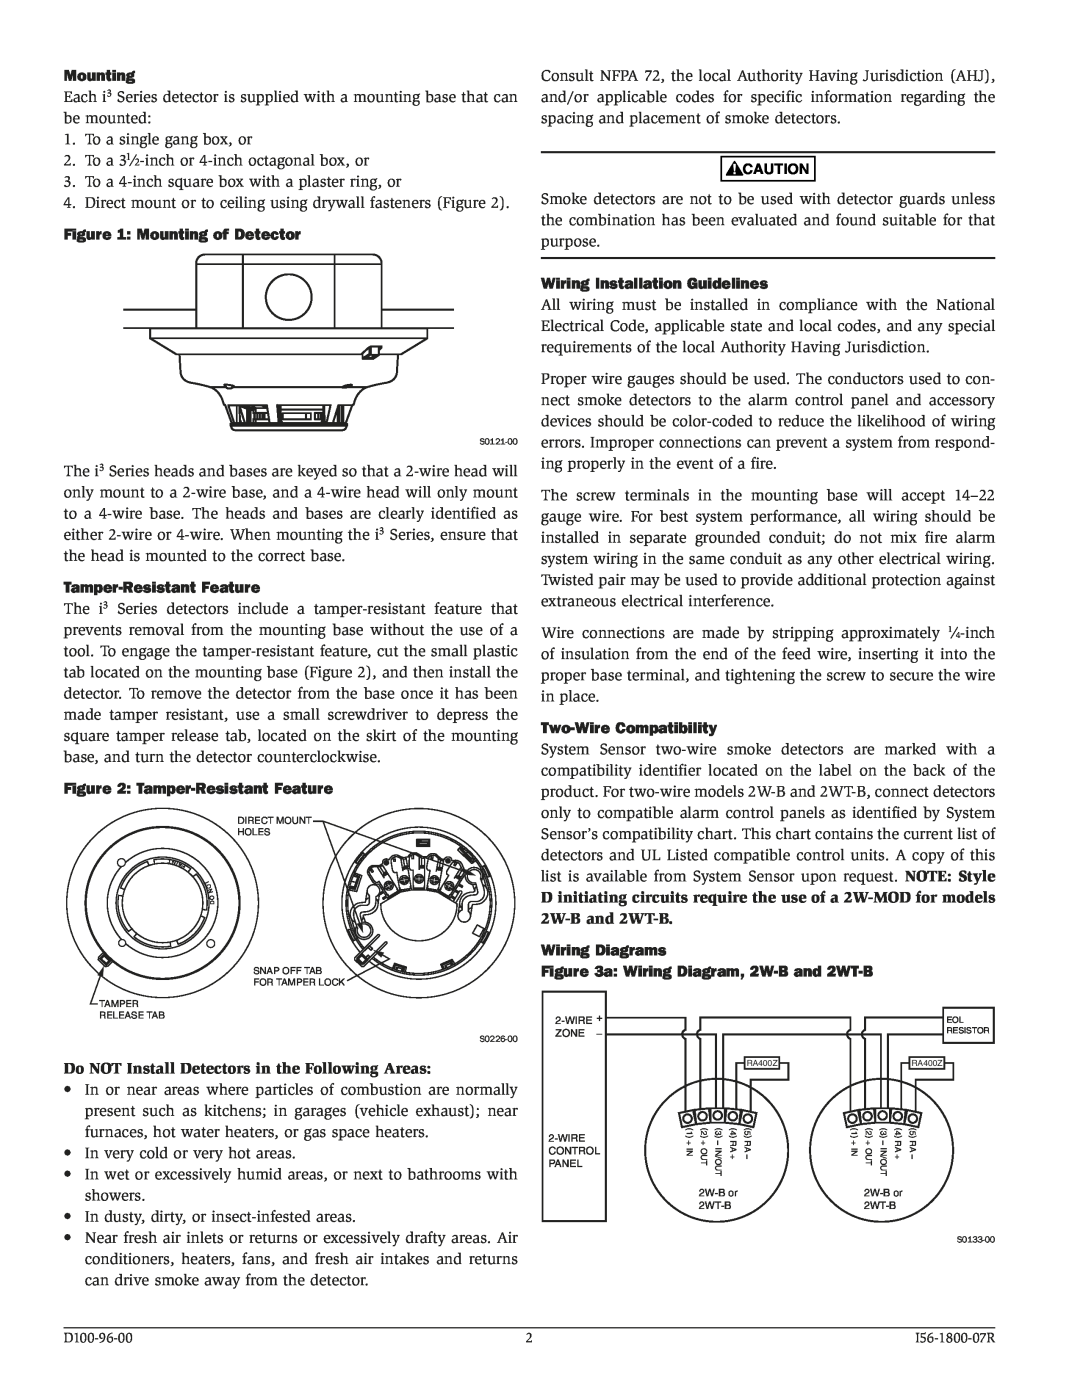 System Sensor 2W-B Mounting of Detector, Tamper-ResistantFeature, Wiring Installation Guidelines, Wiring Diagrams 